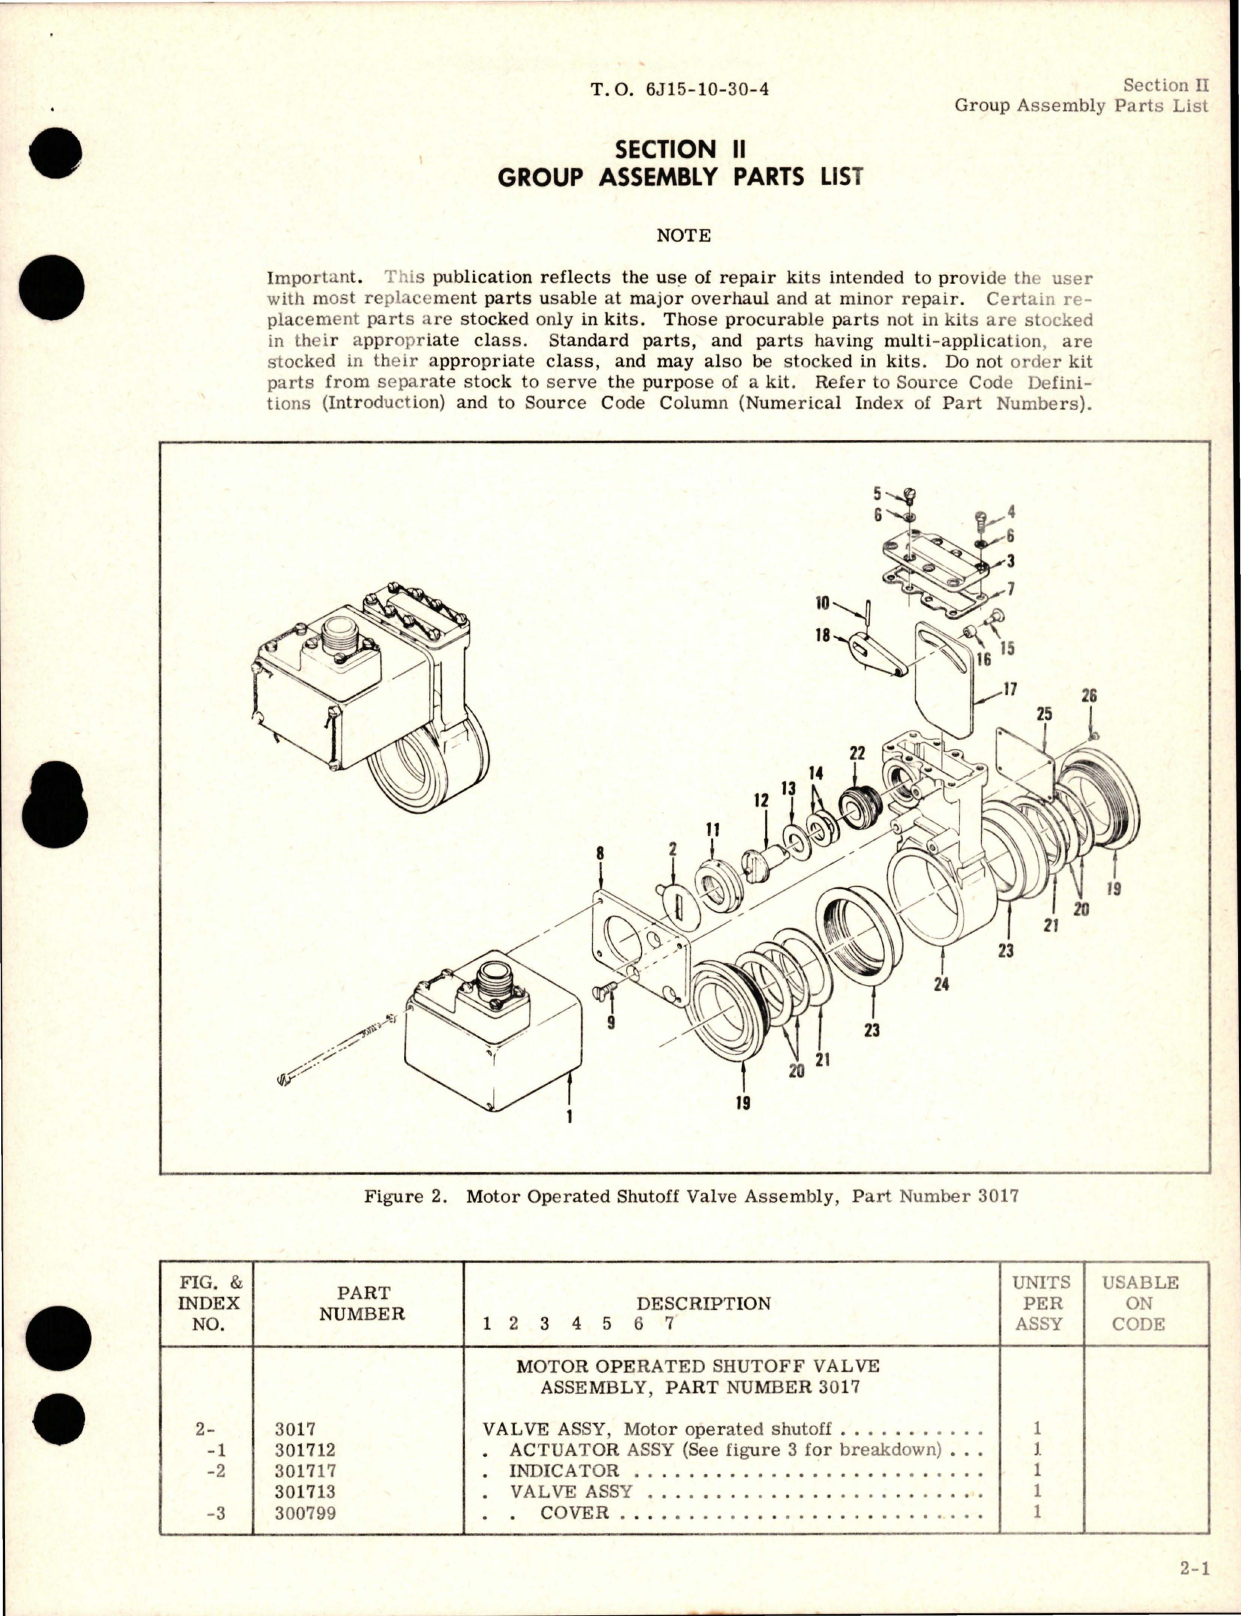 Sample page 7 from AirCorps Library document: Illustrated Parts Breakdown for Motor Operated Shutoff Valve